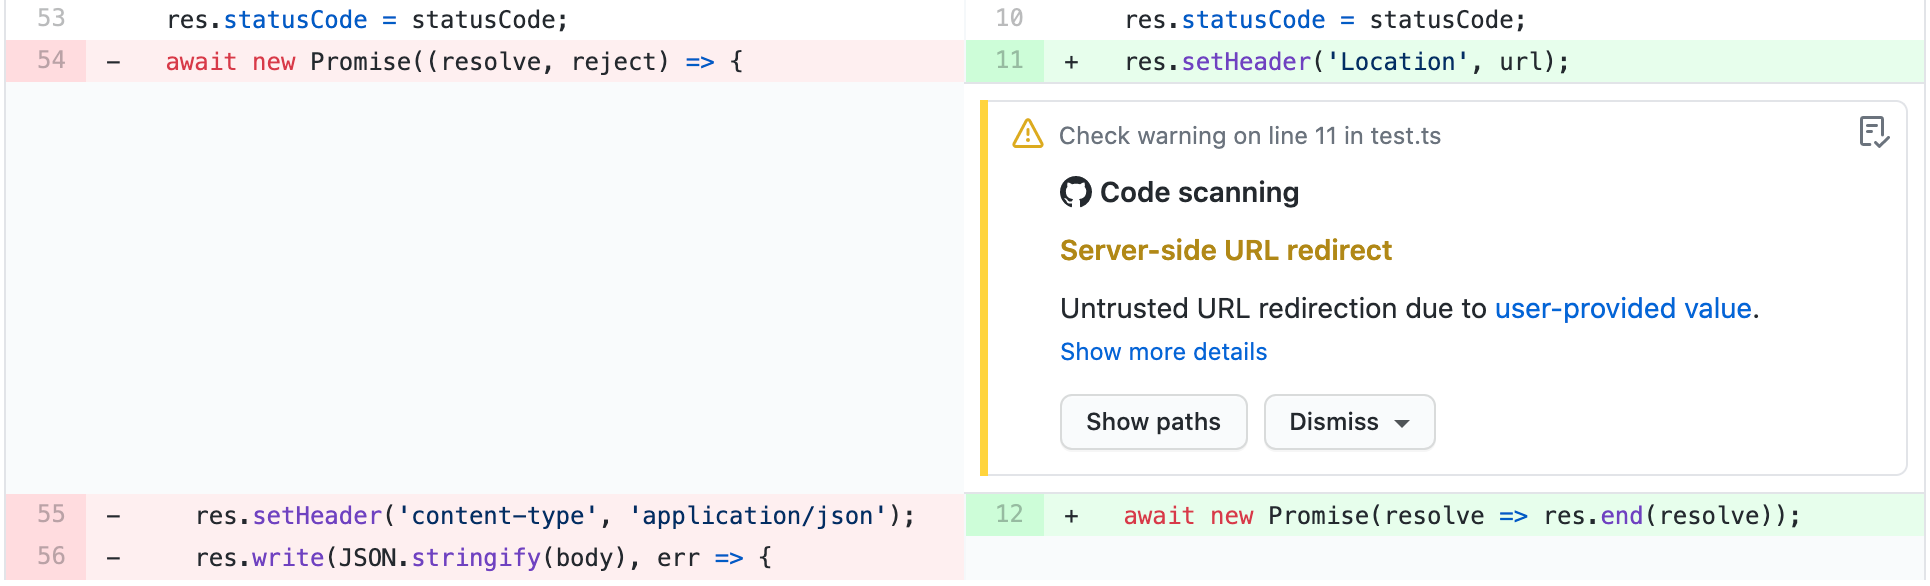 Screenshot showing an alert annotation within a pull request diff.